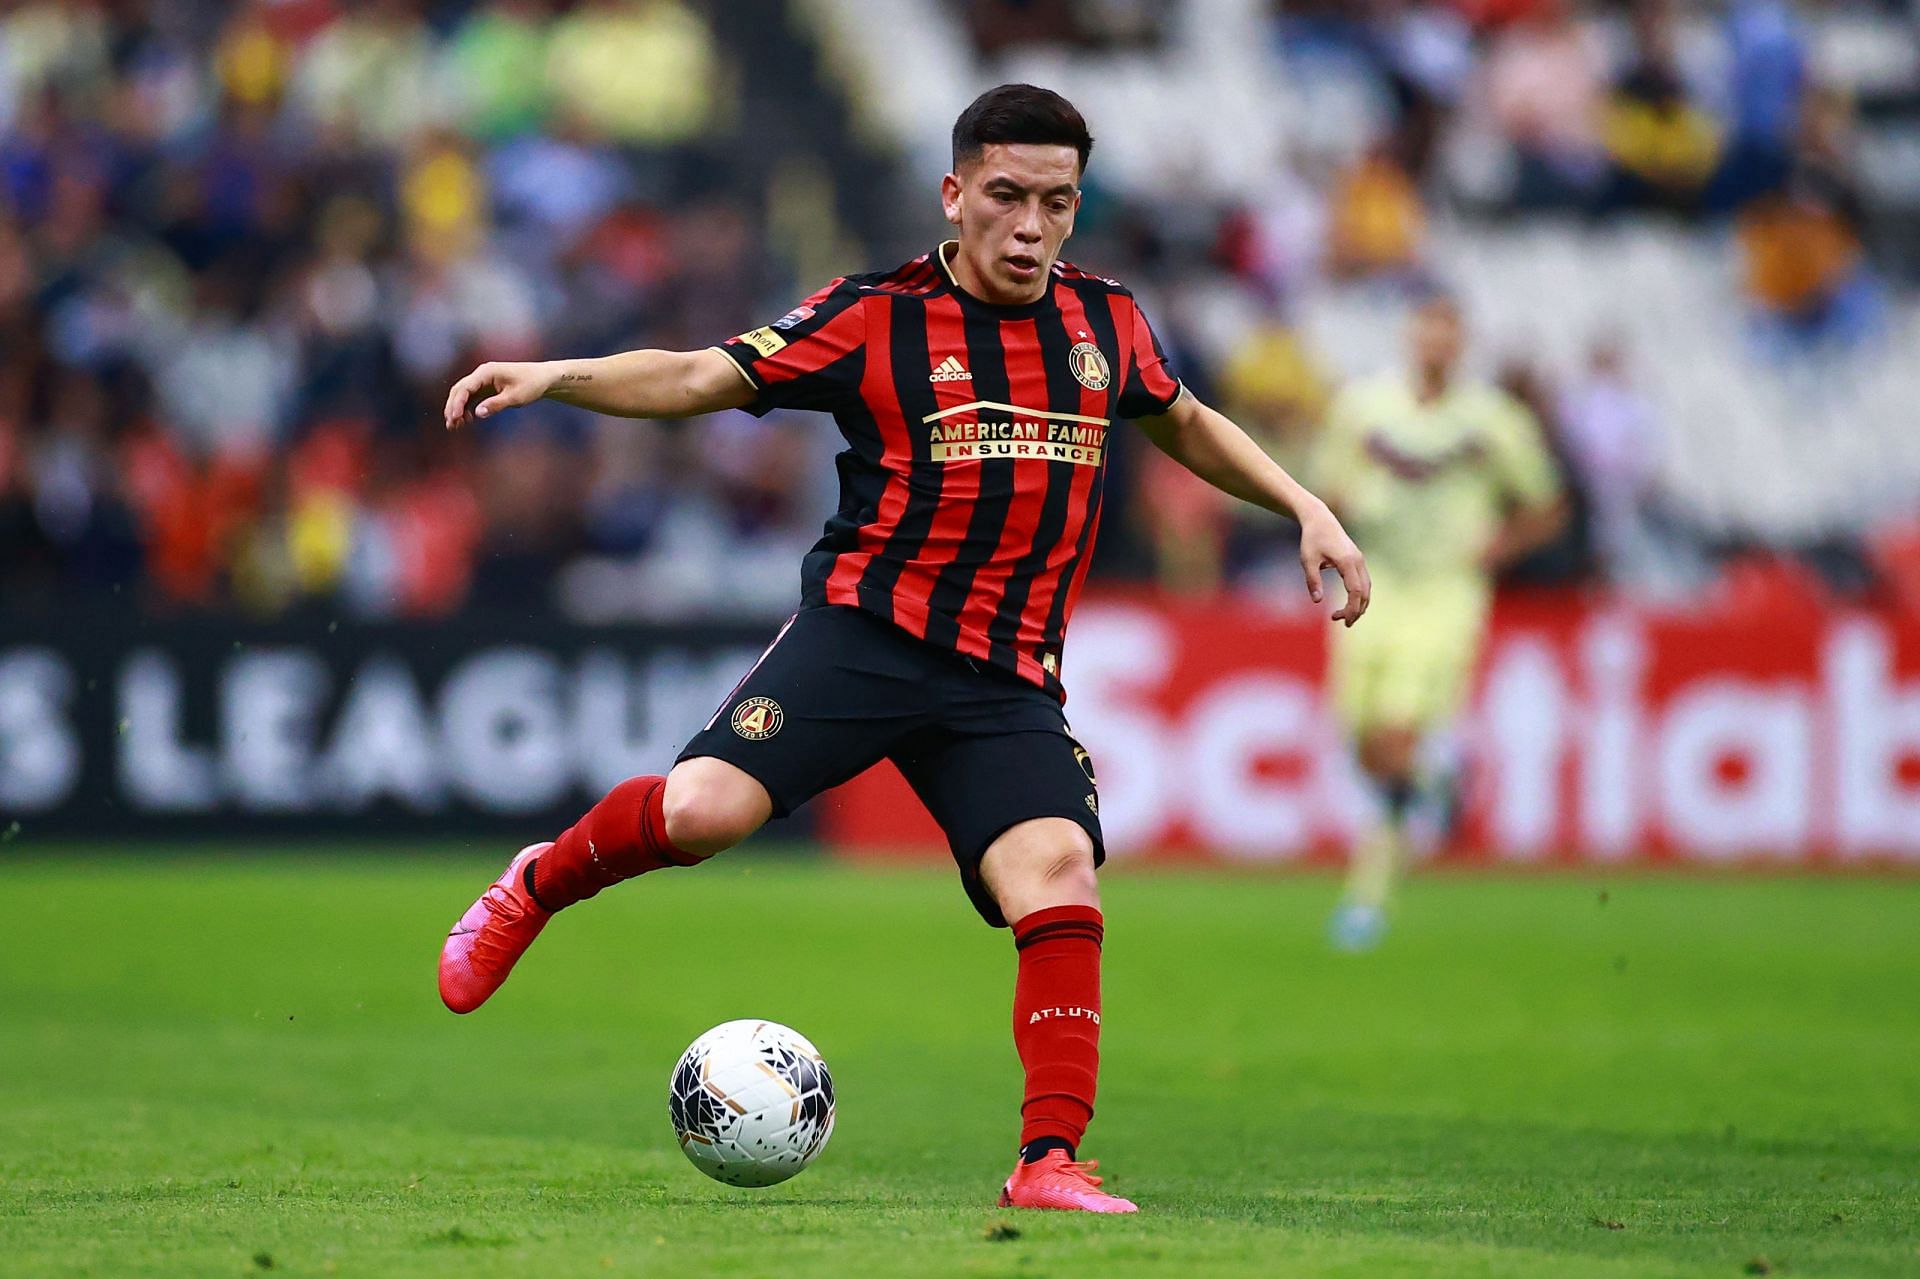 Barco will be a huge miss for Atlanta United